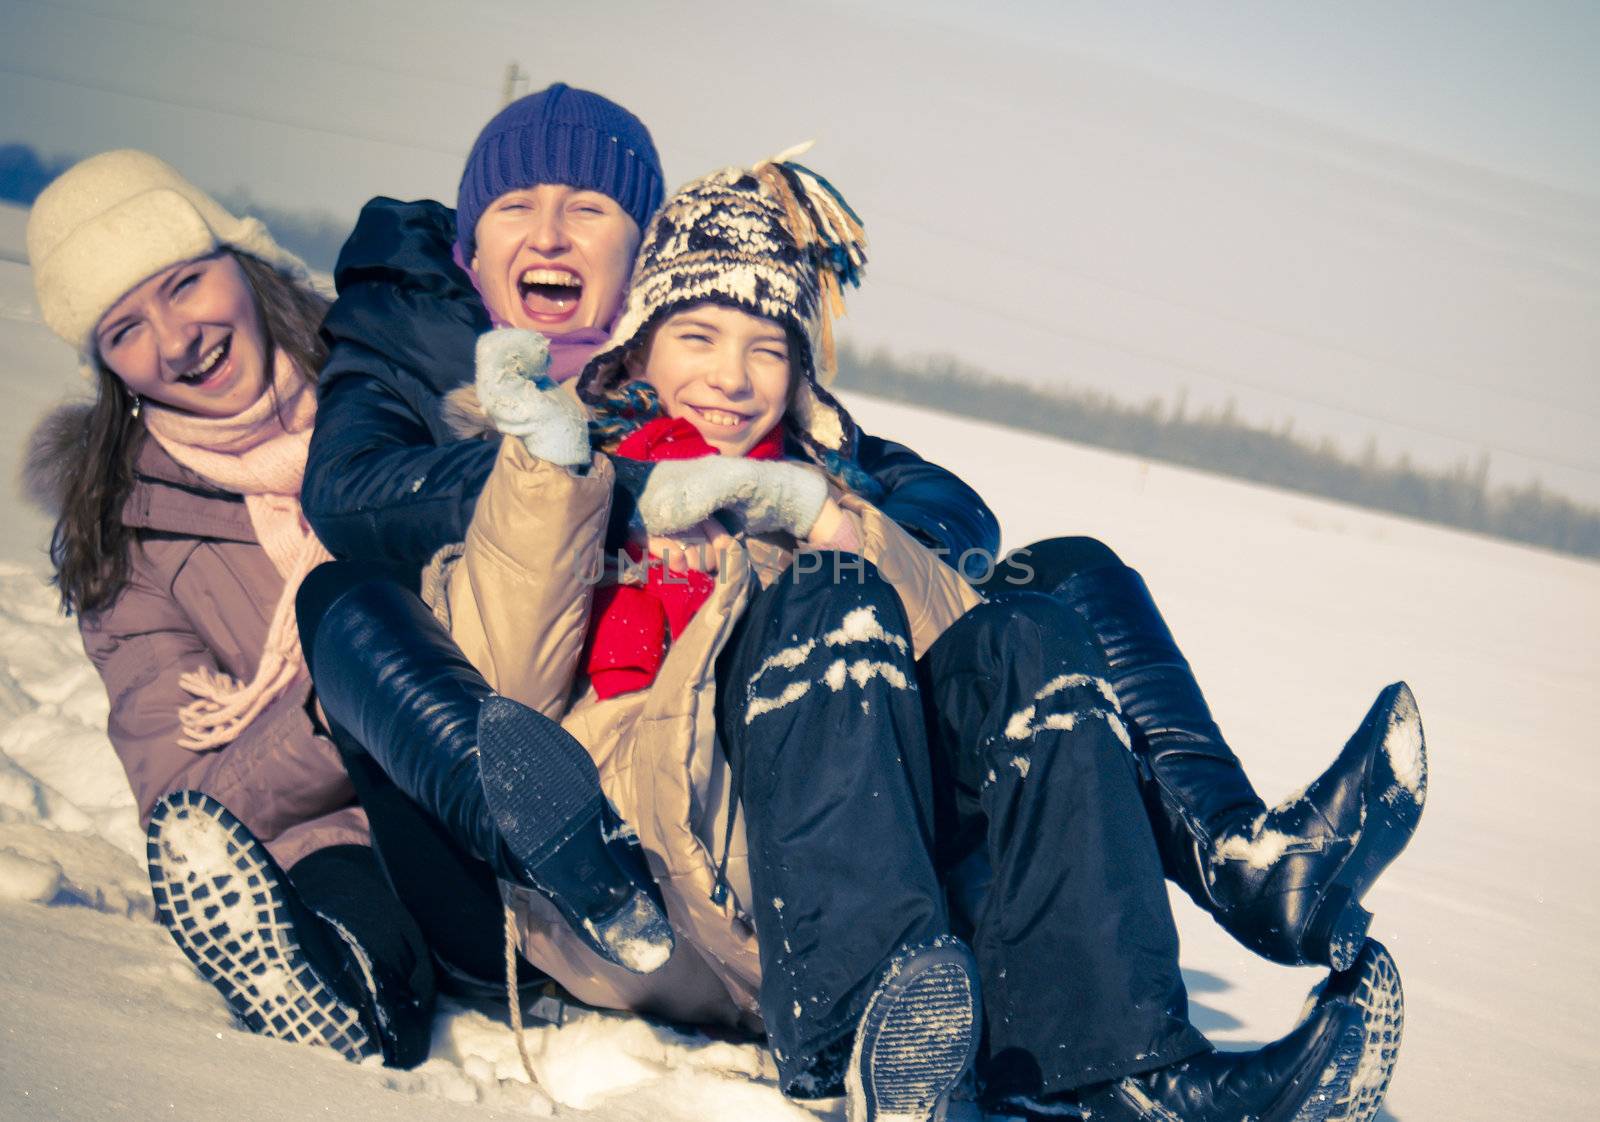 Three happy sisters sledding at winter time by AndreyKr